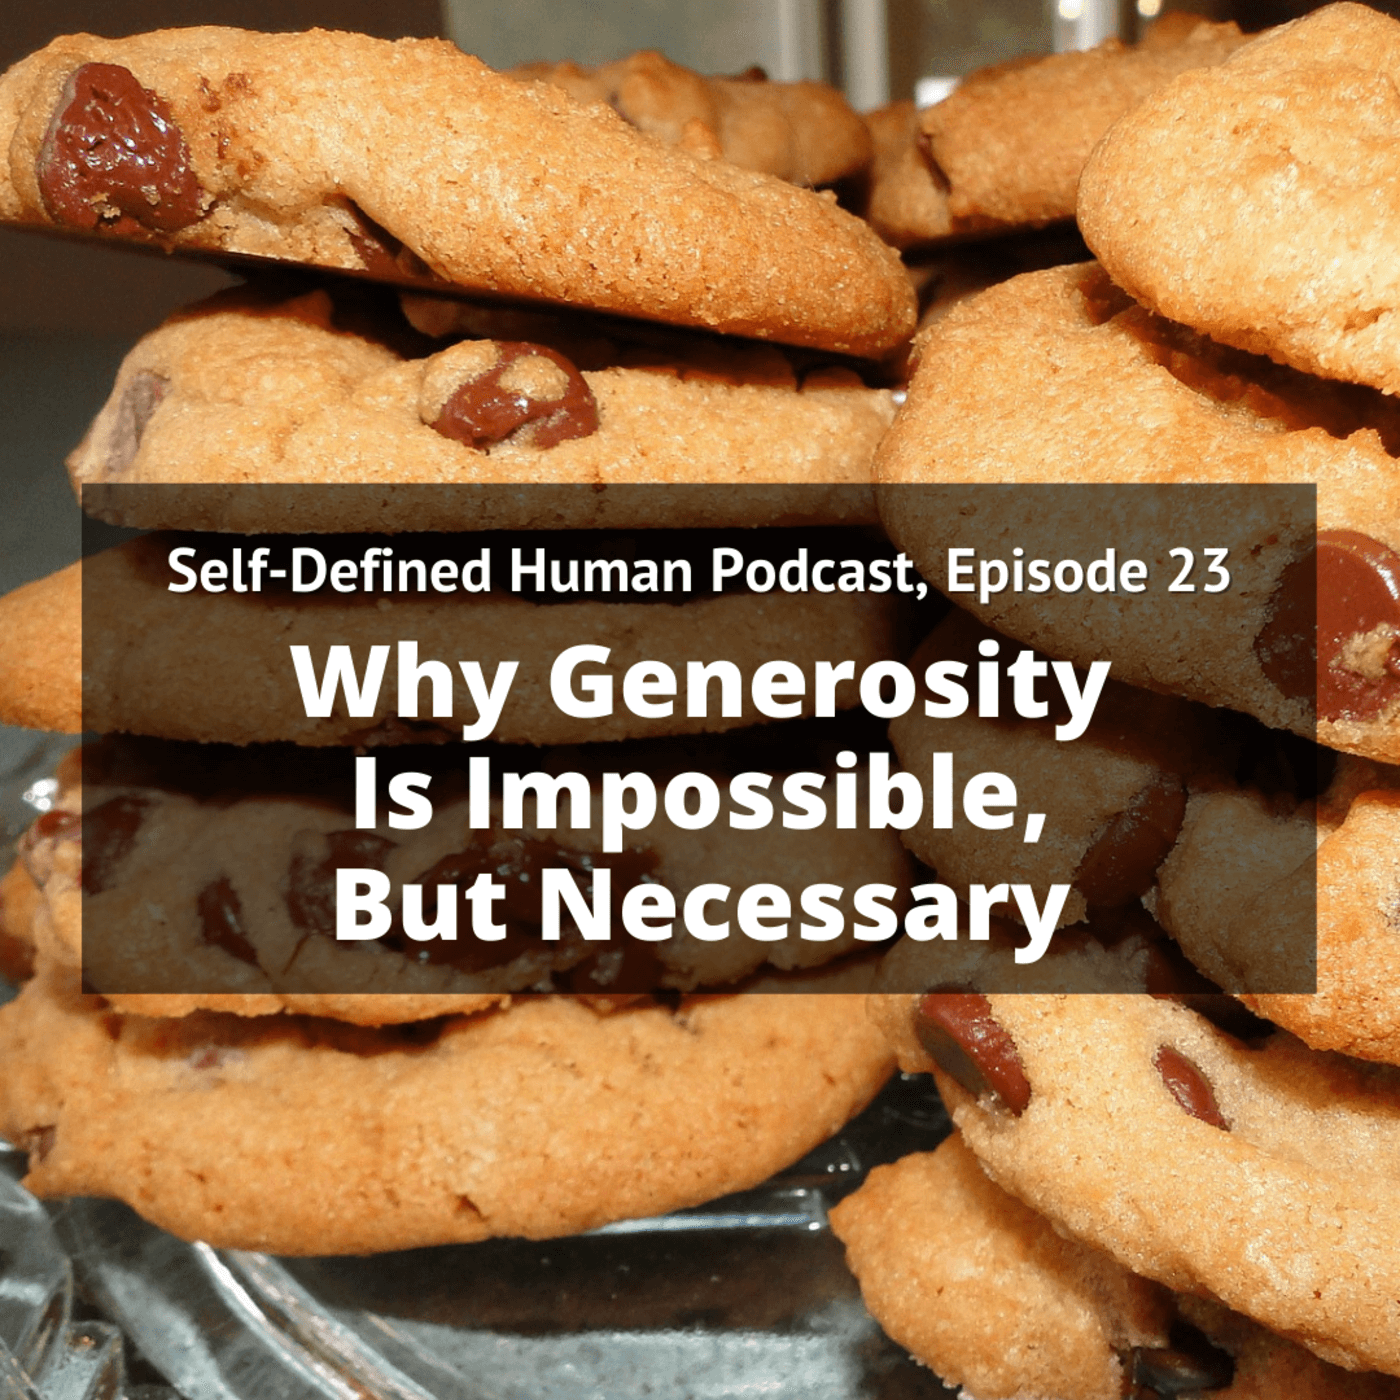 Self-Defined Human Podcast, Episode 23: Why Generosity is Impossible, But Necessary